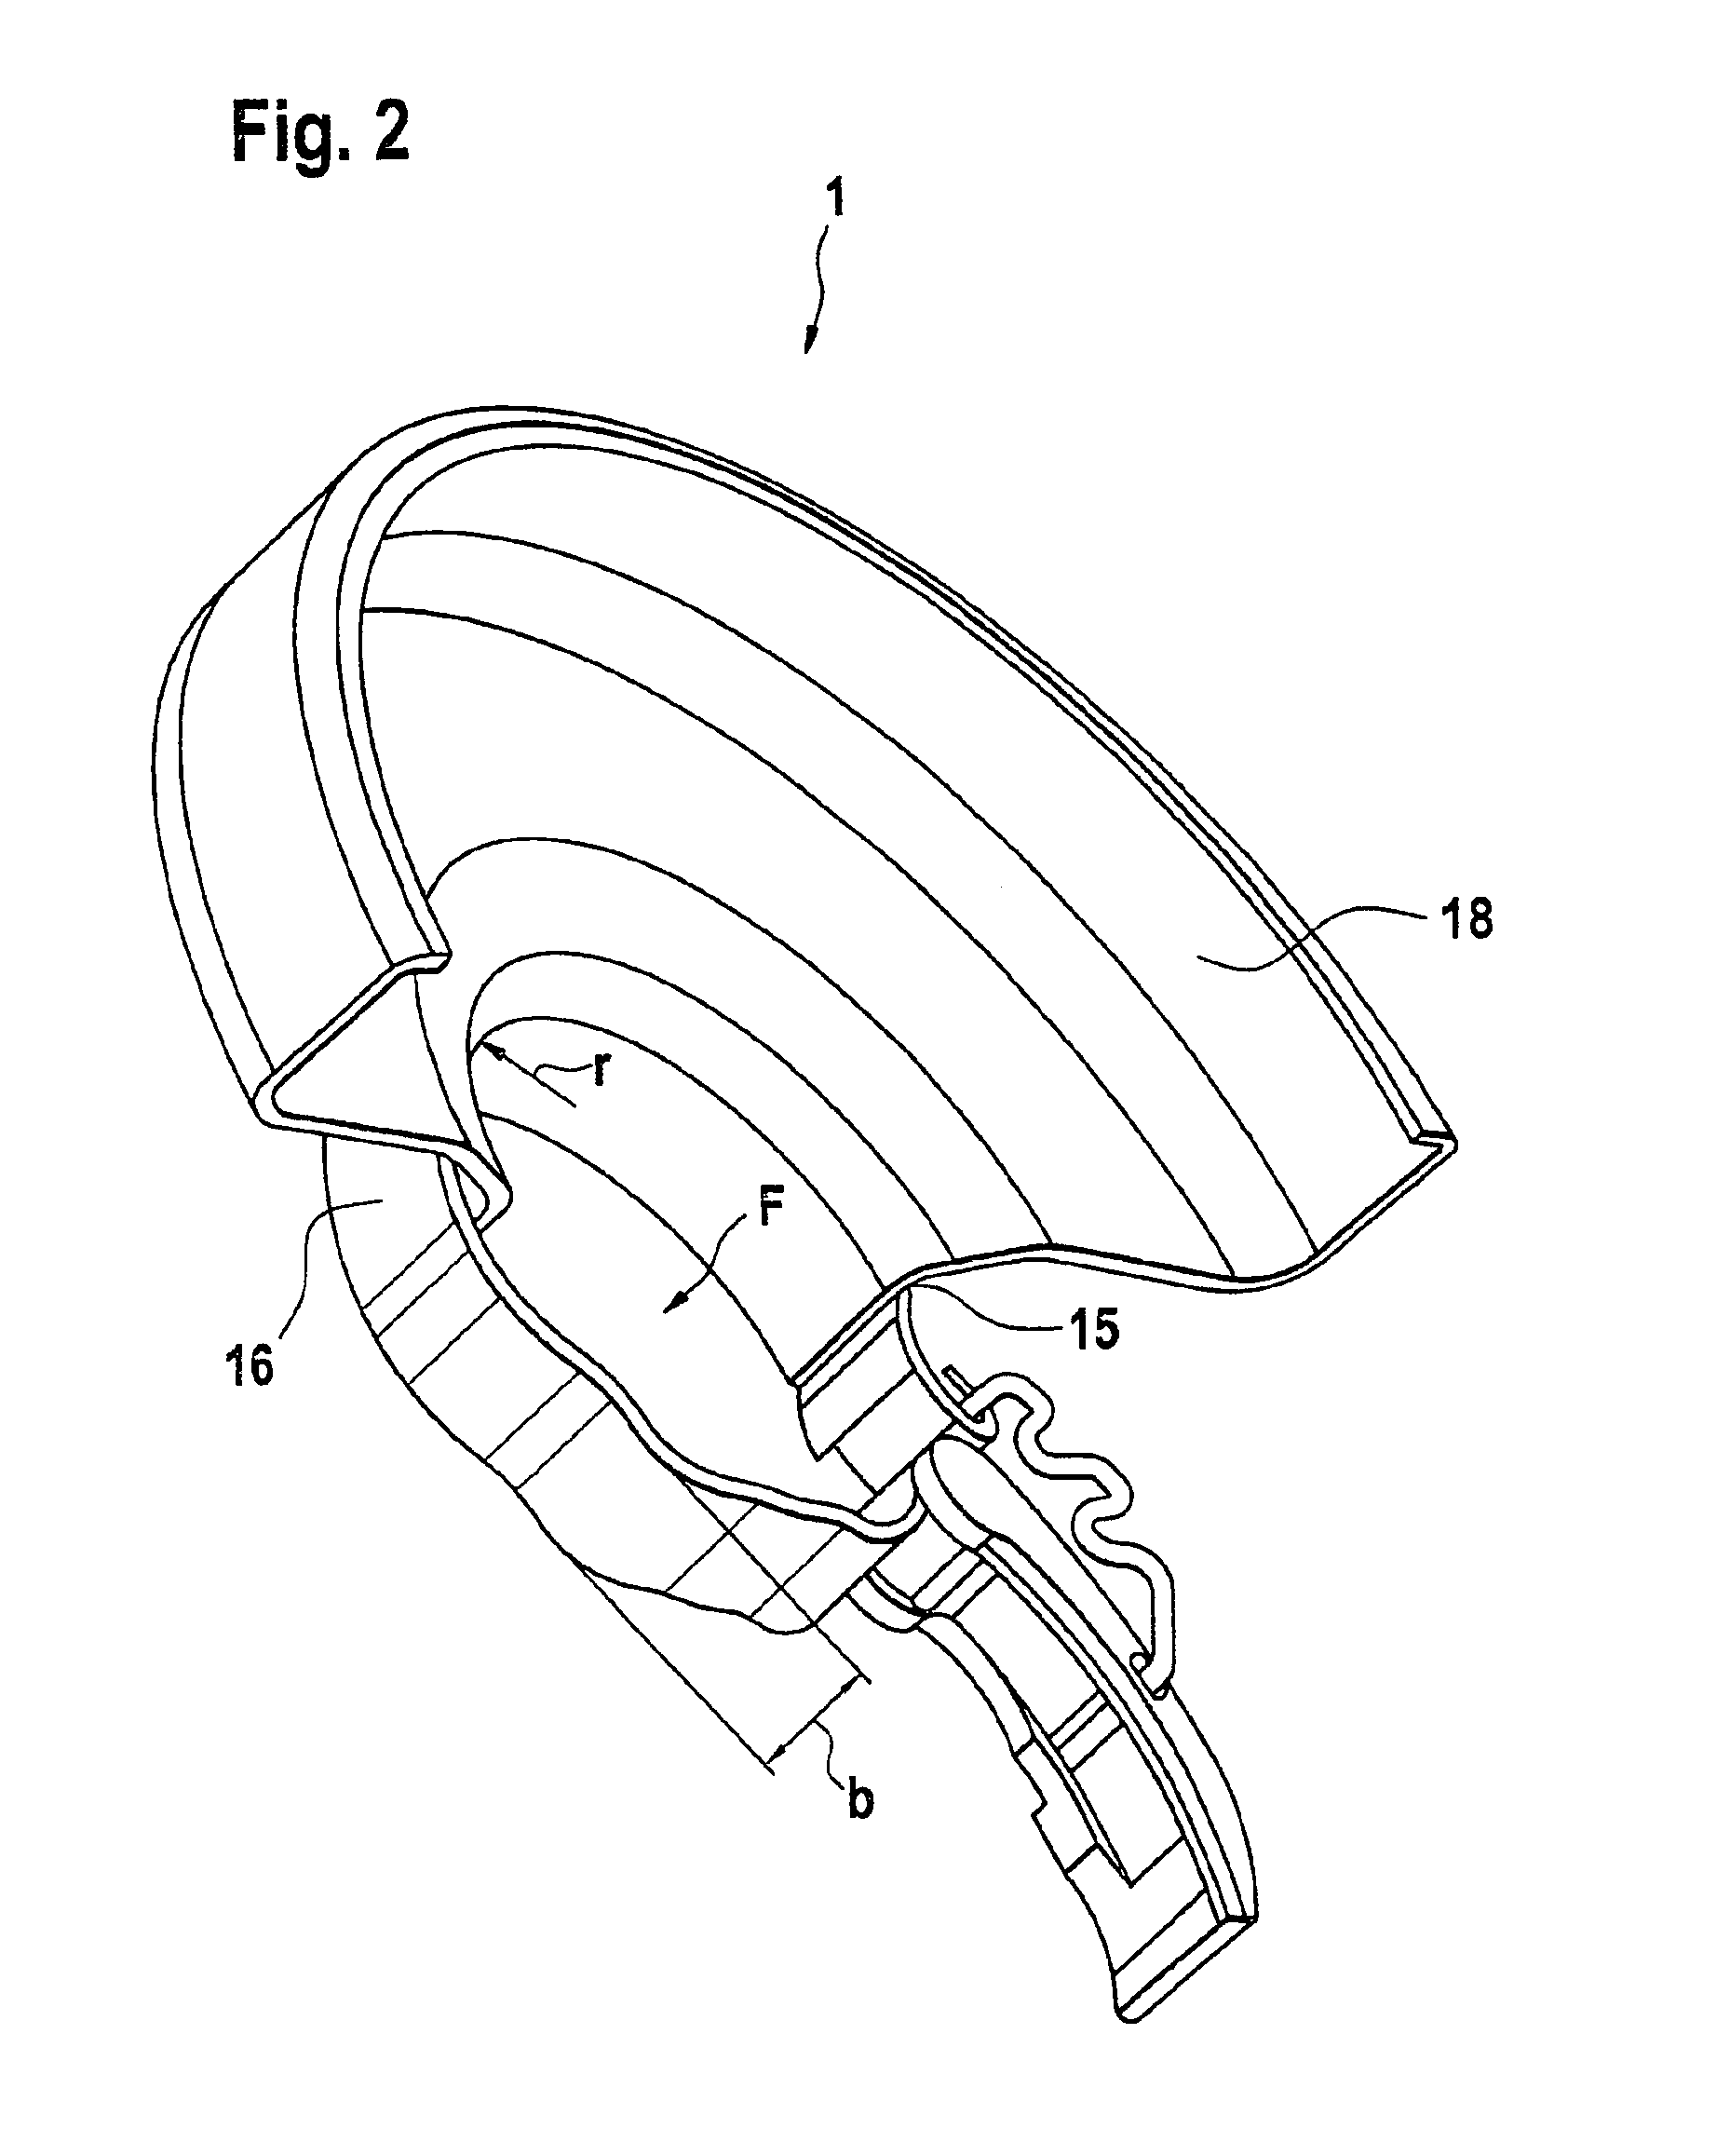 Hand-guided electric tool comprising a guard